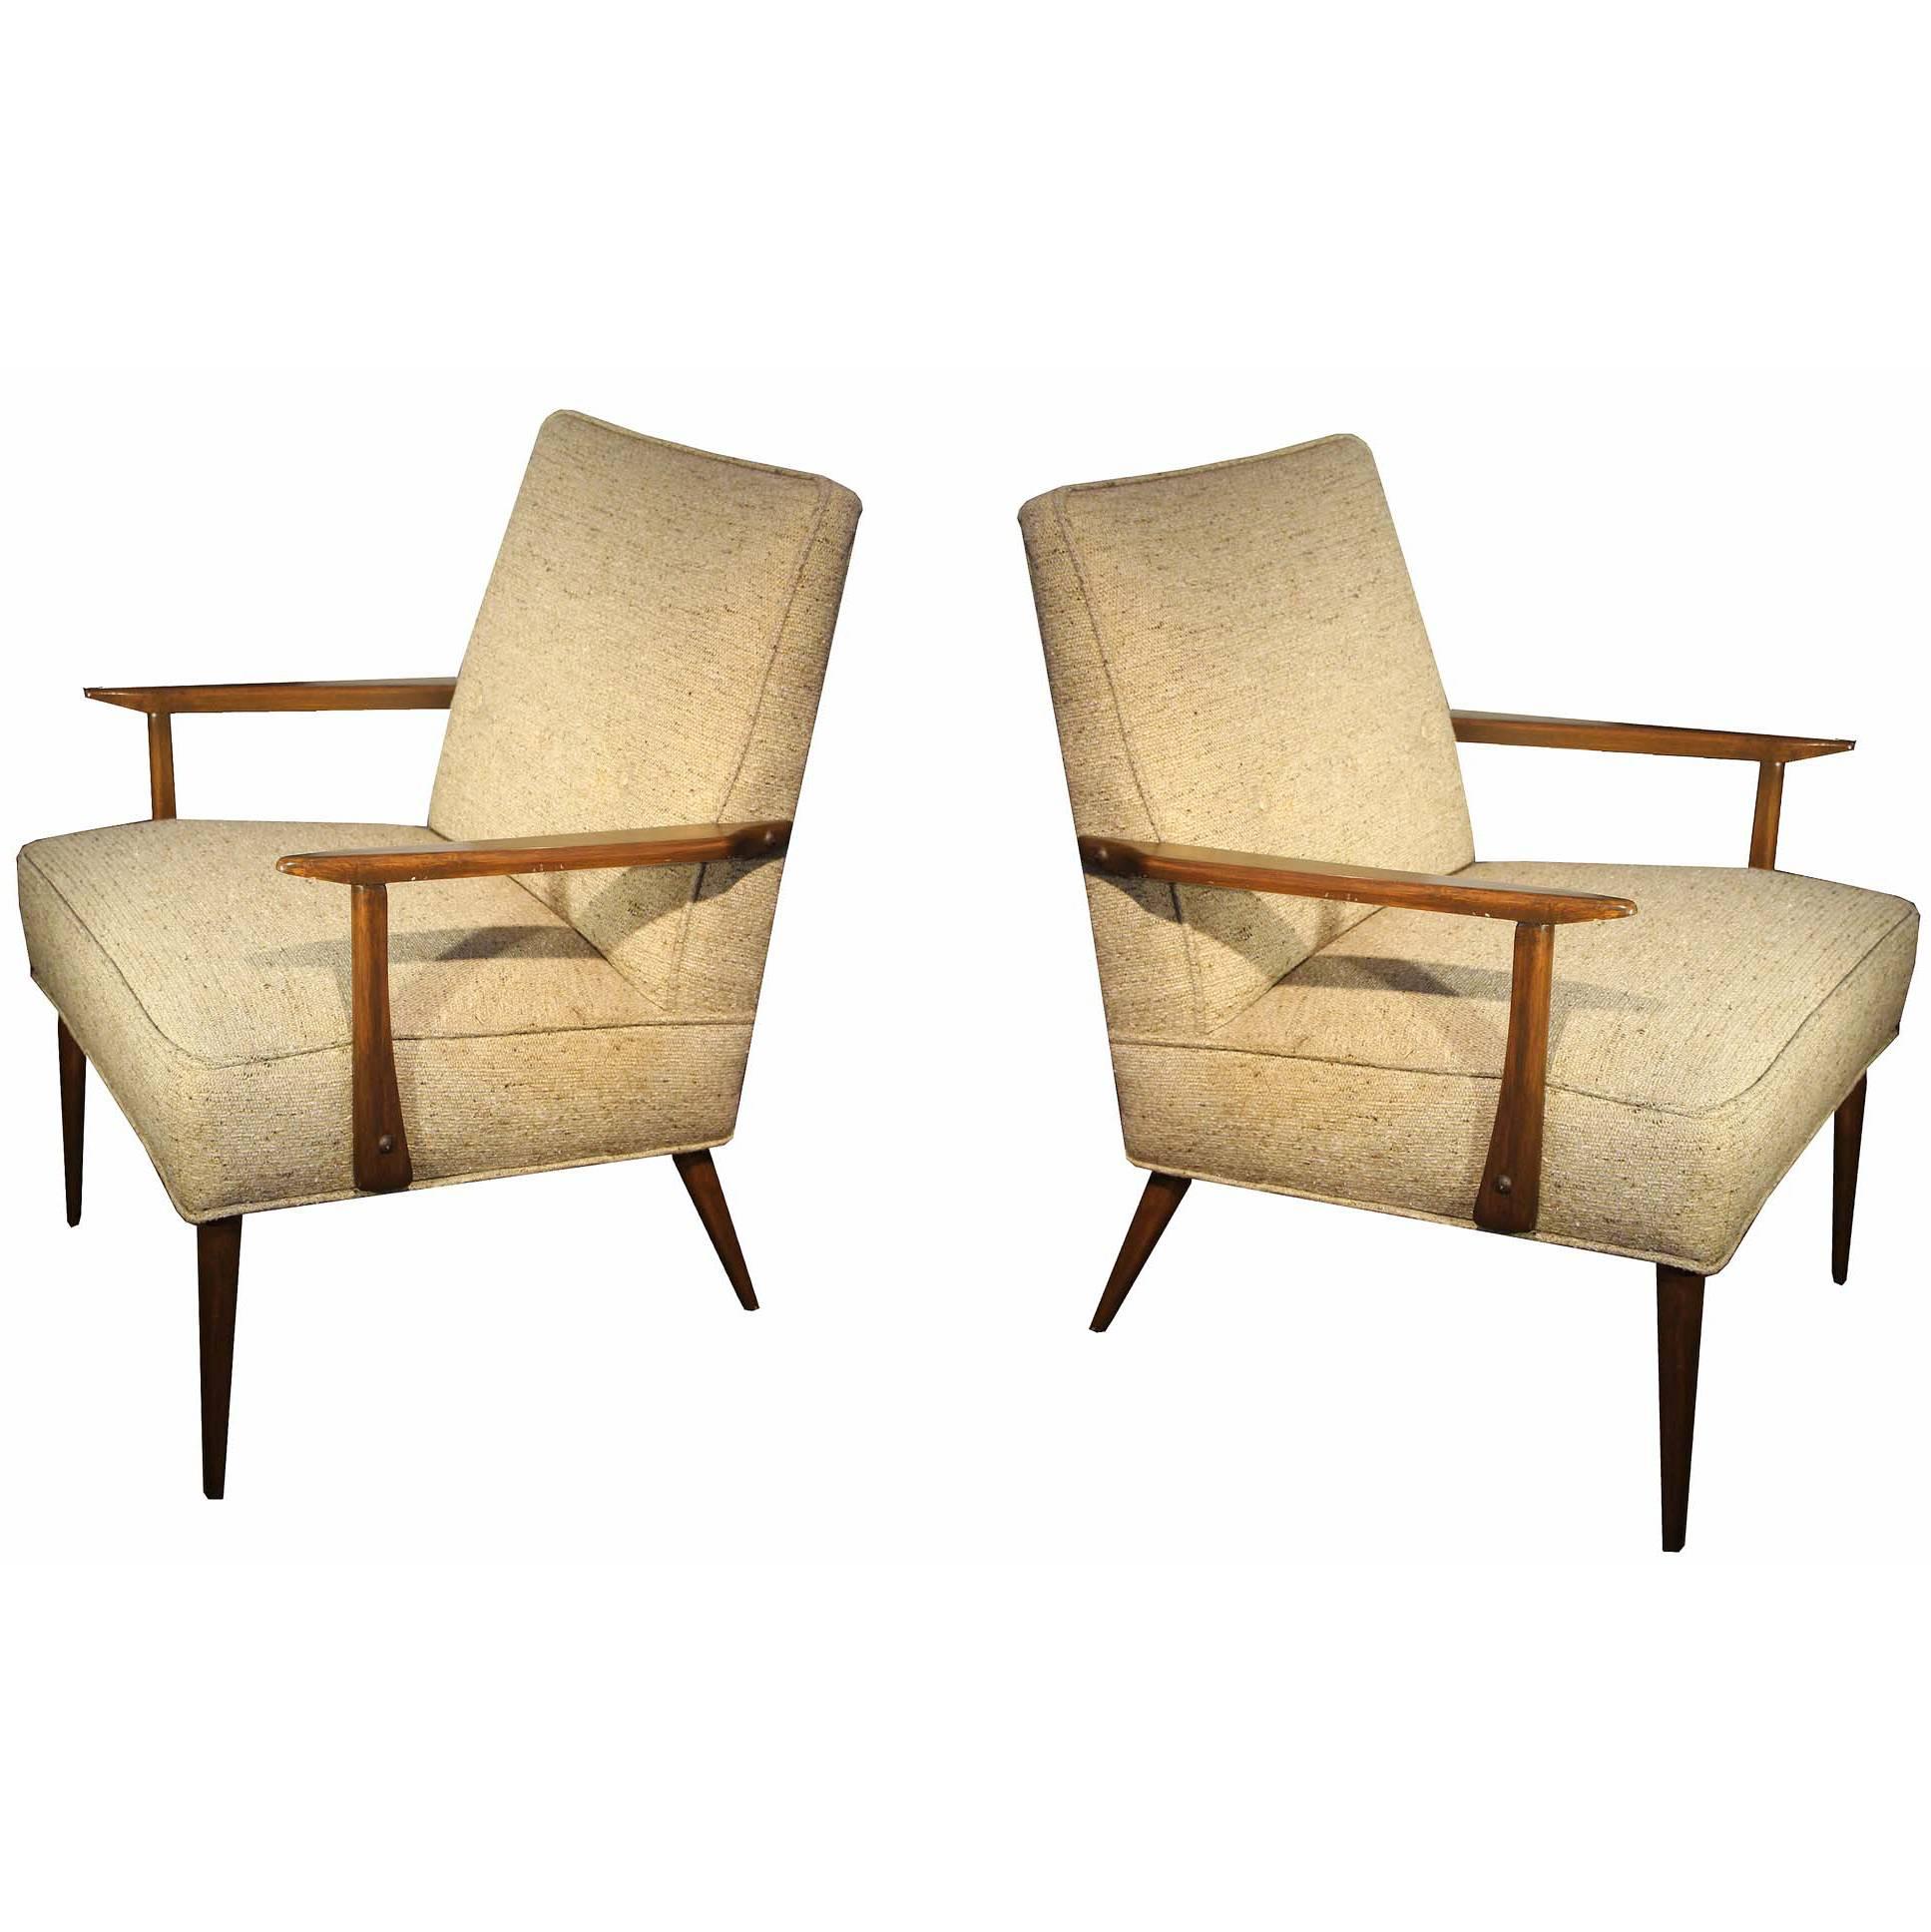 Pair of Midcentury Upholstered Chairs